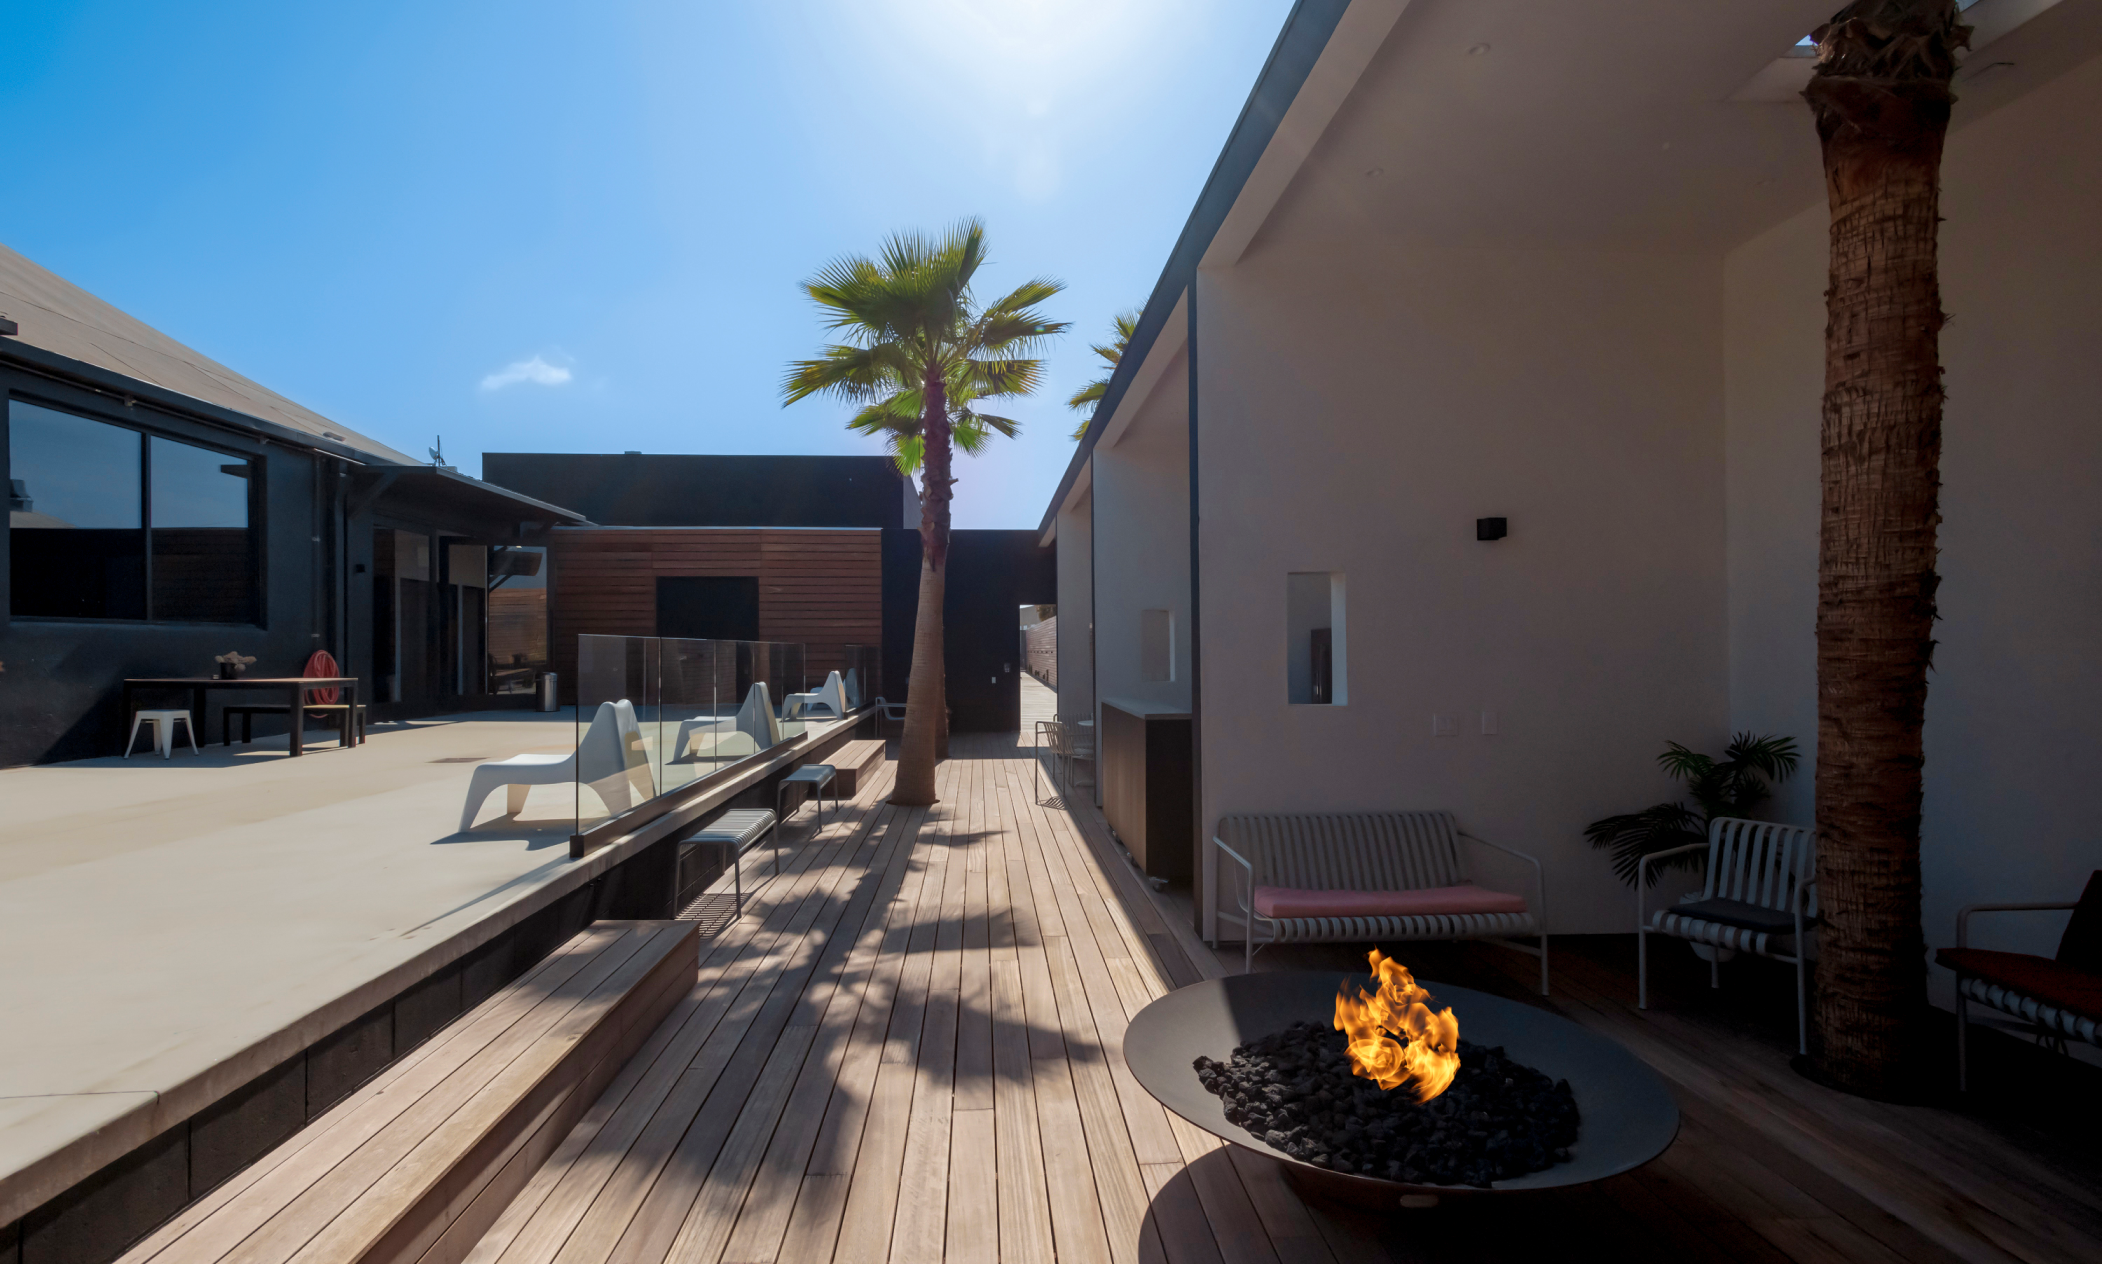 A modern style wooden deck with a fire pit, check chairs and palm trees.